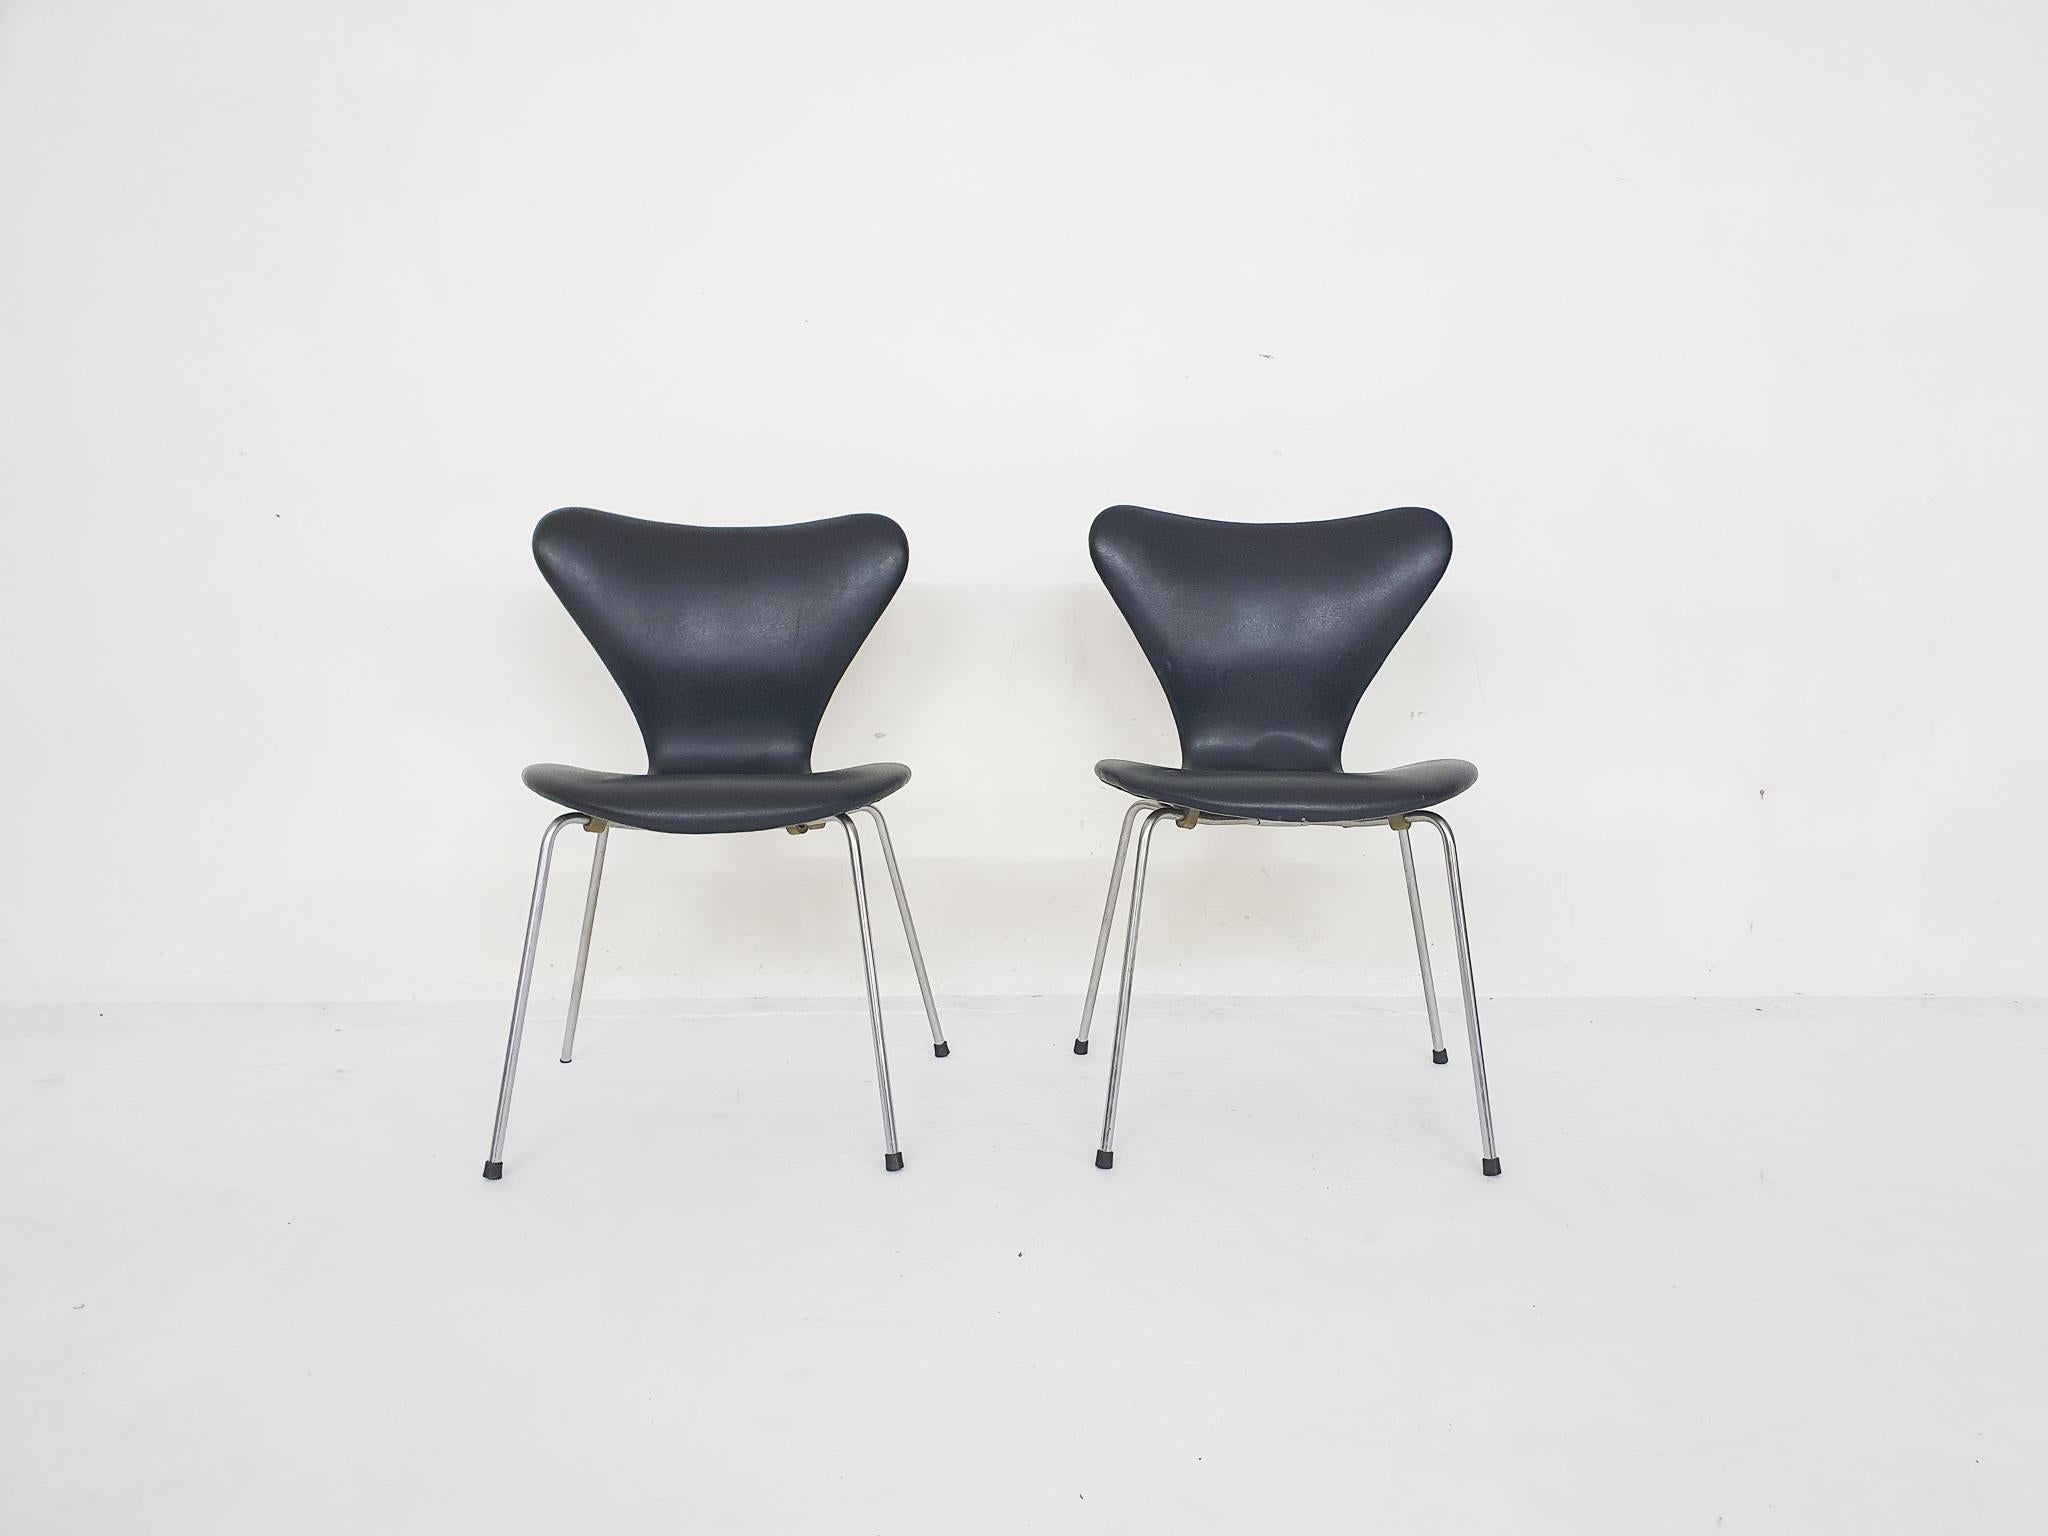 Set of 2 Butterfly chairs by Arne Jacobsen for Fritz Hansen. Metal frame and black faux leather upholstery. In good original condition. Some rust on the frame.

Arne Jacobsen
Arne Jacobsen was a Danish architect and designer. He is remembered for